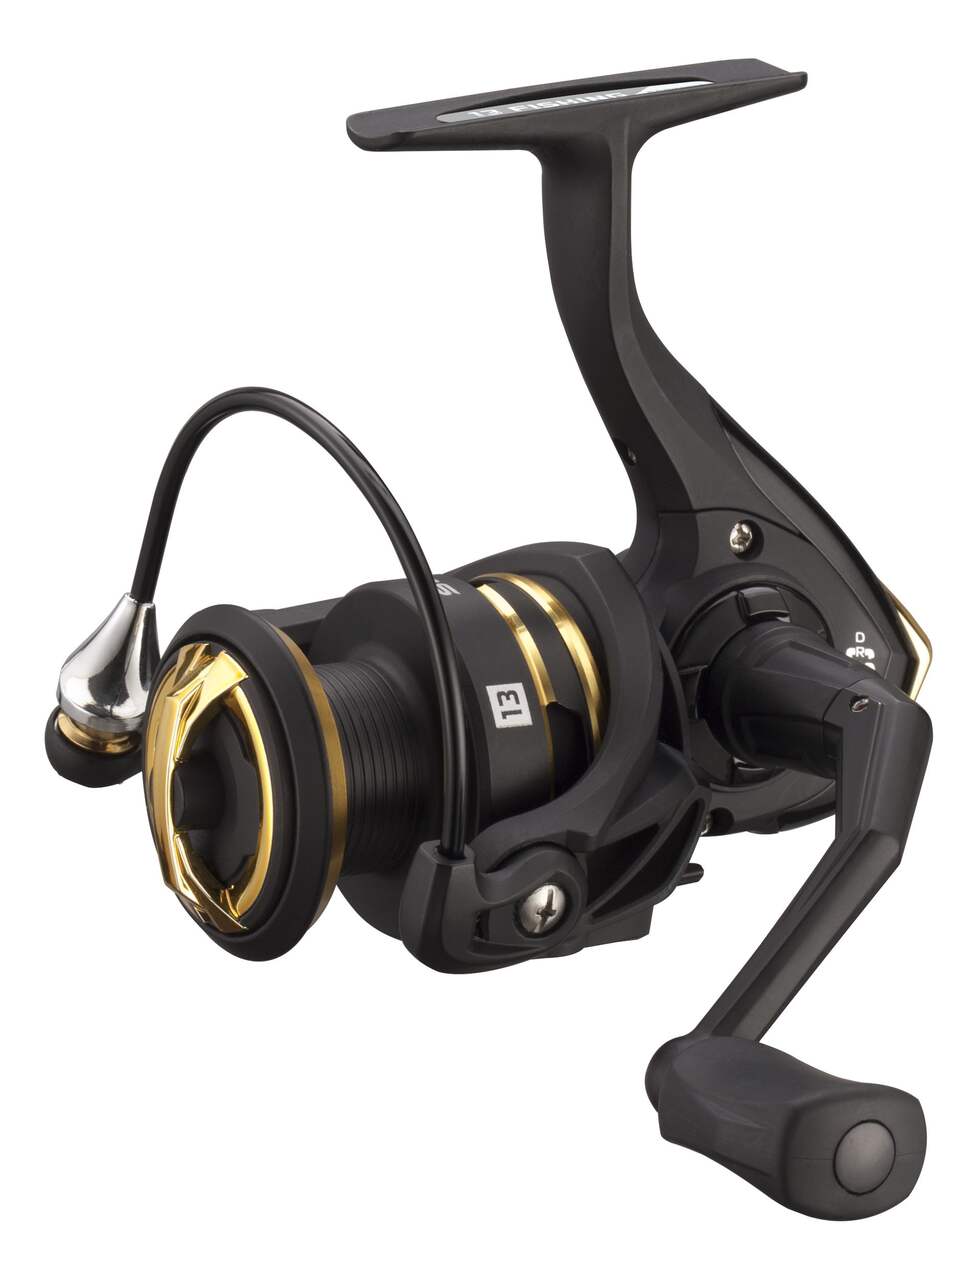 13 Fishing Source R Spinning Fishing Reel, Right Hand/Left Hand, Size 3000